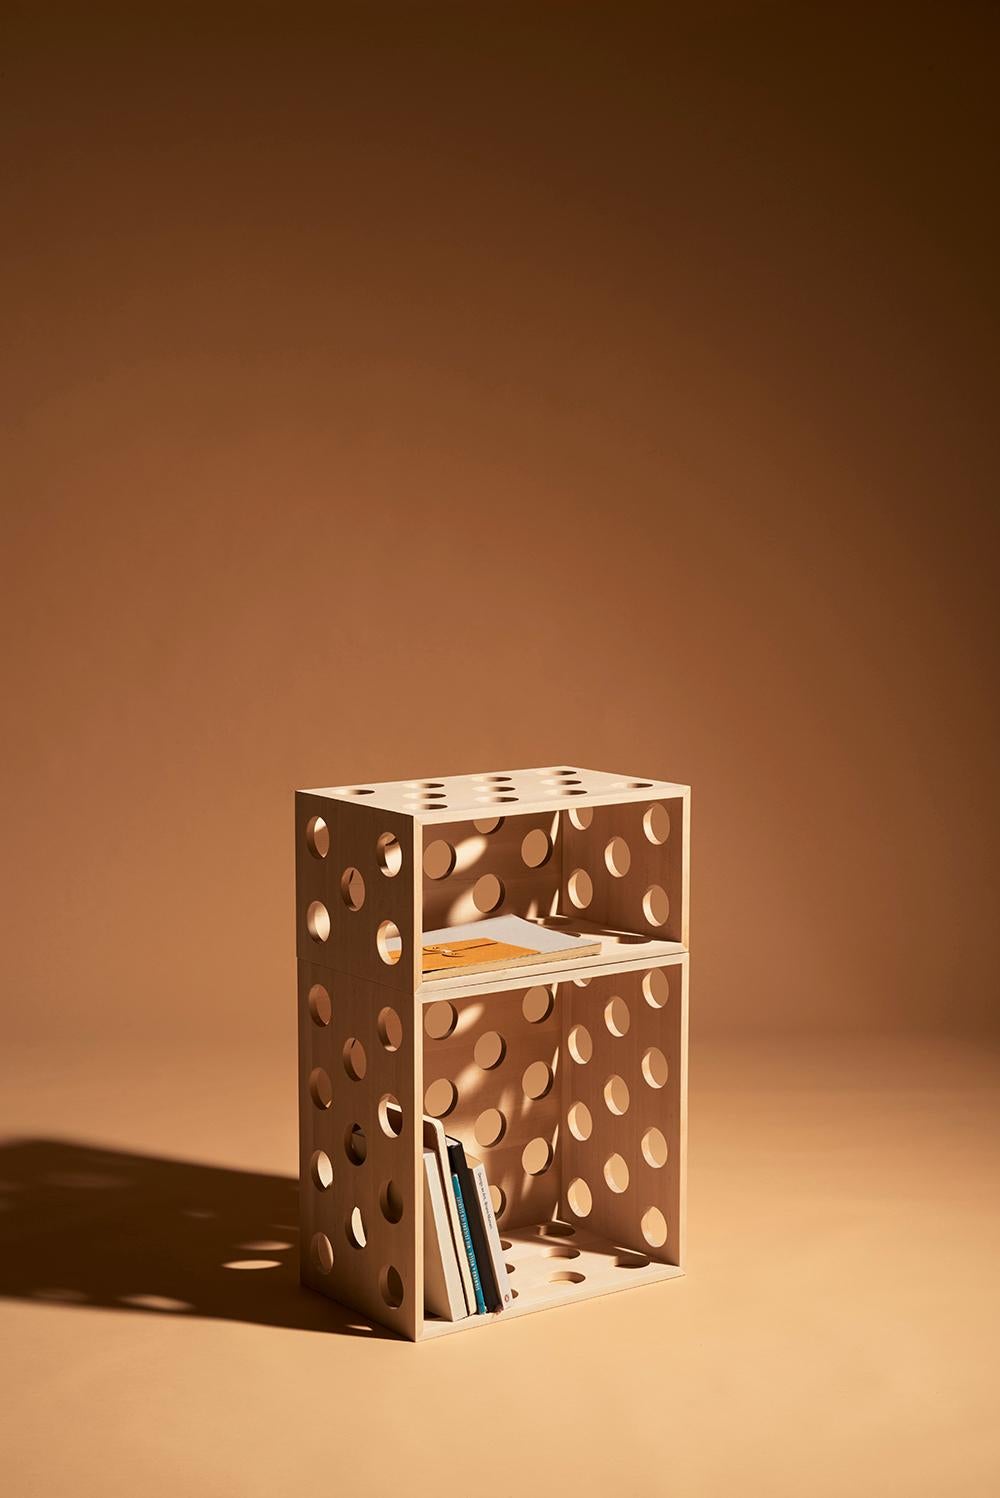 Perforated Medium Storage Box, Solid Birch Wood Perforated Box by Erik Olovsson In New Condition For Sale In Stockholm, SE